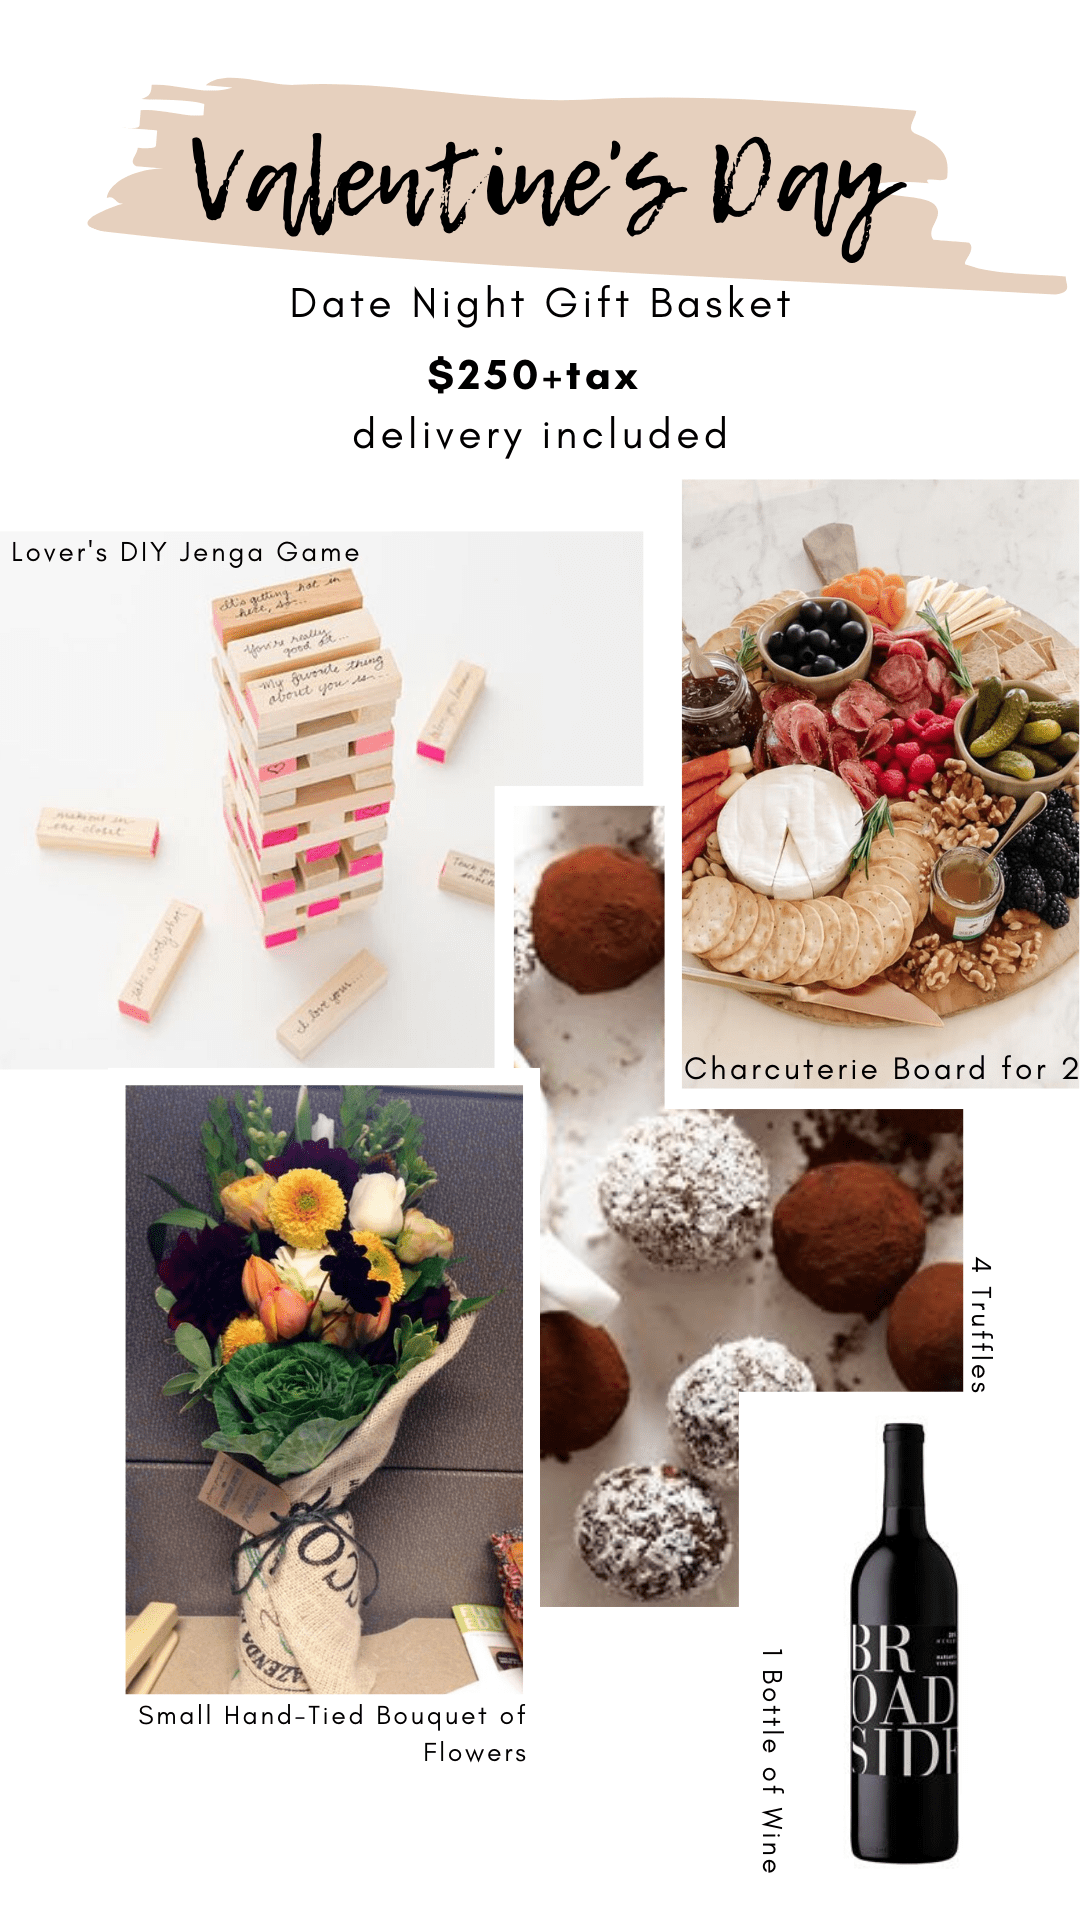 an ad for Valentine's Day gift baskets with a photo of a jenga game, charcuterie board, bottle of wine, truffles and bouquet of flowers